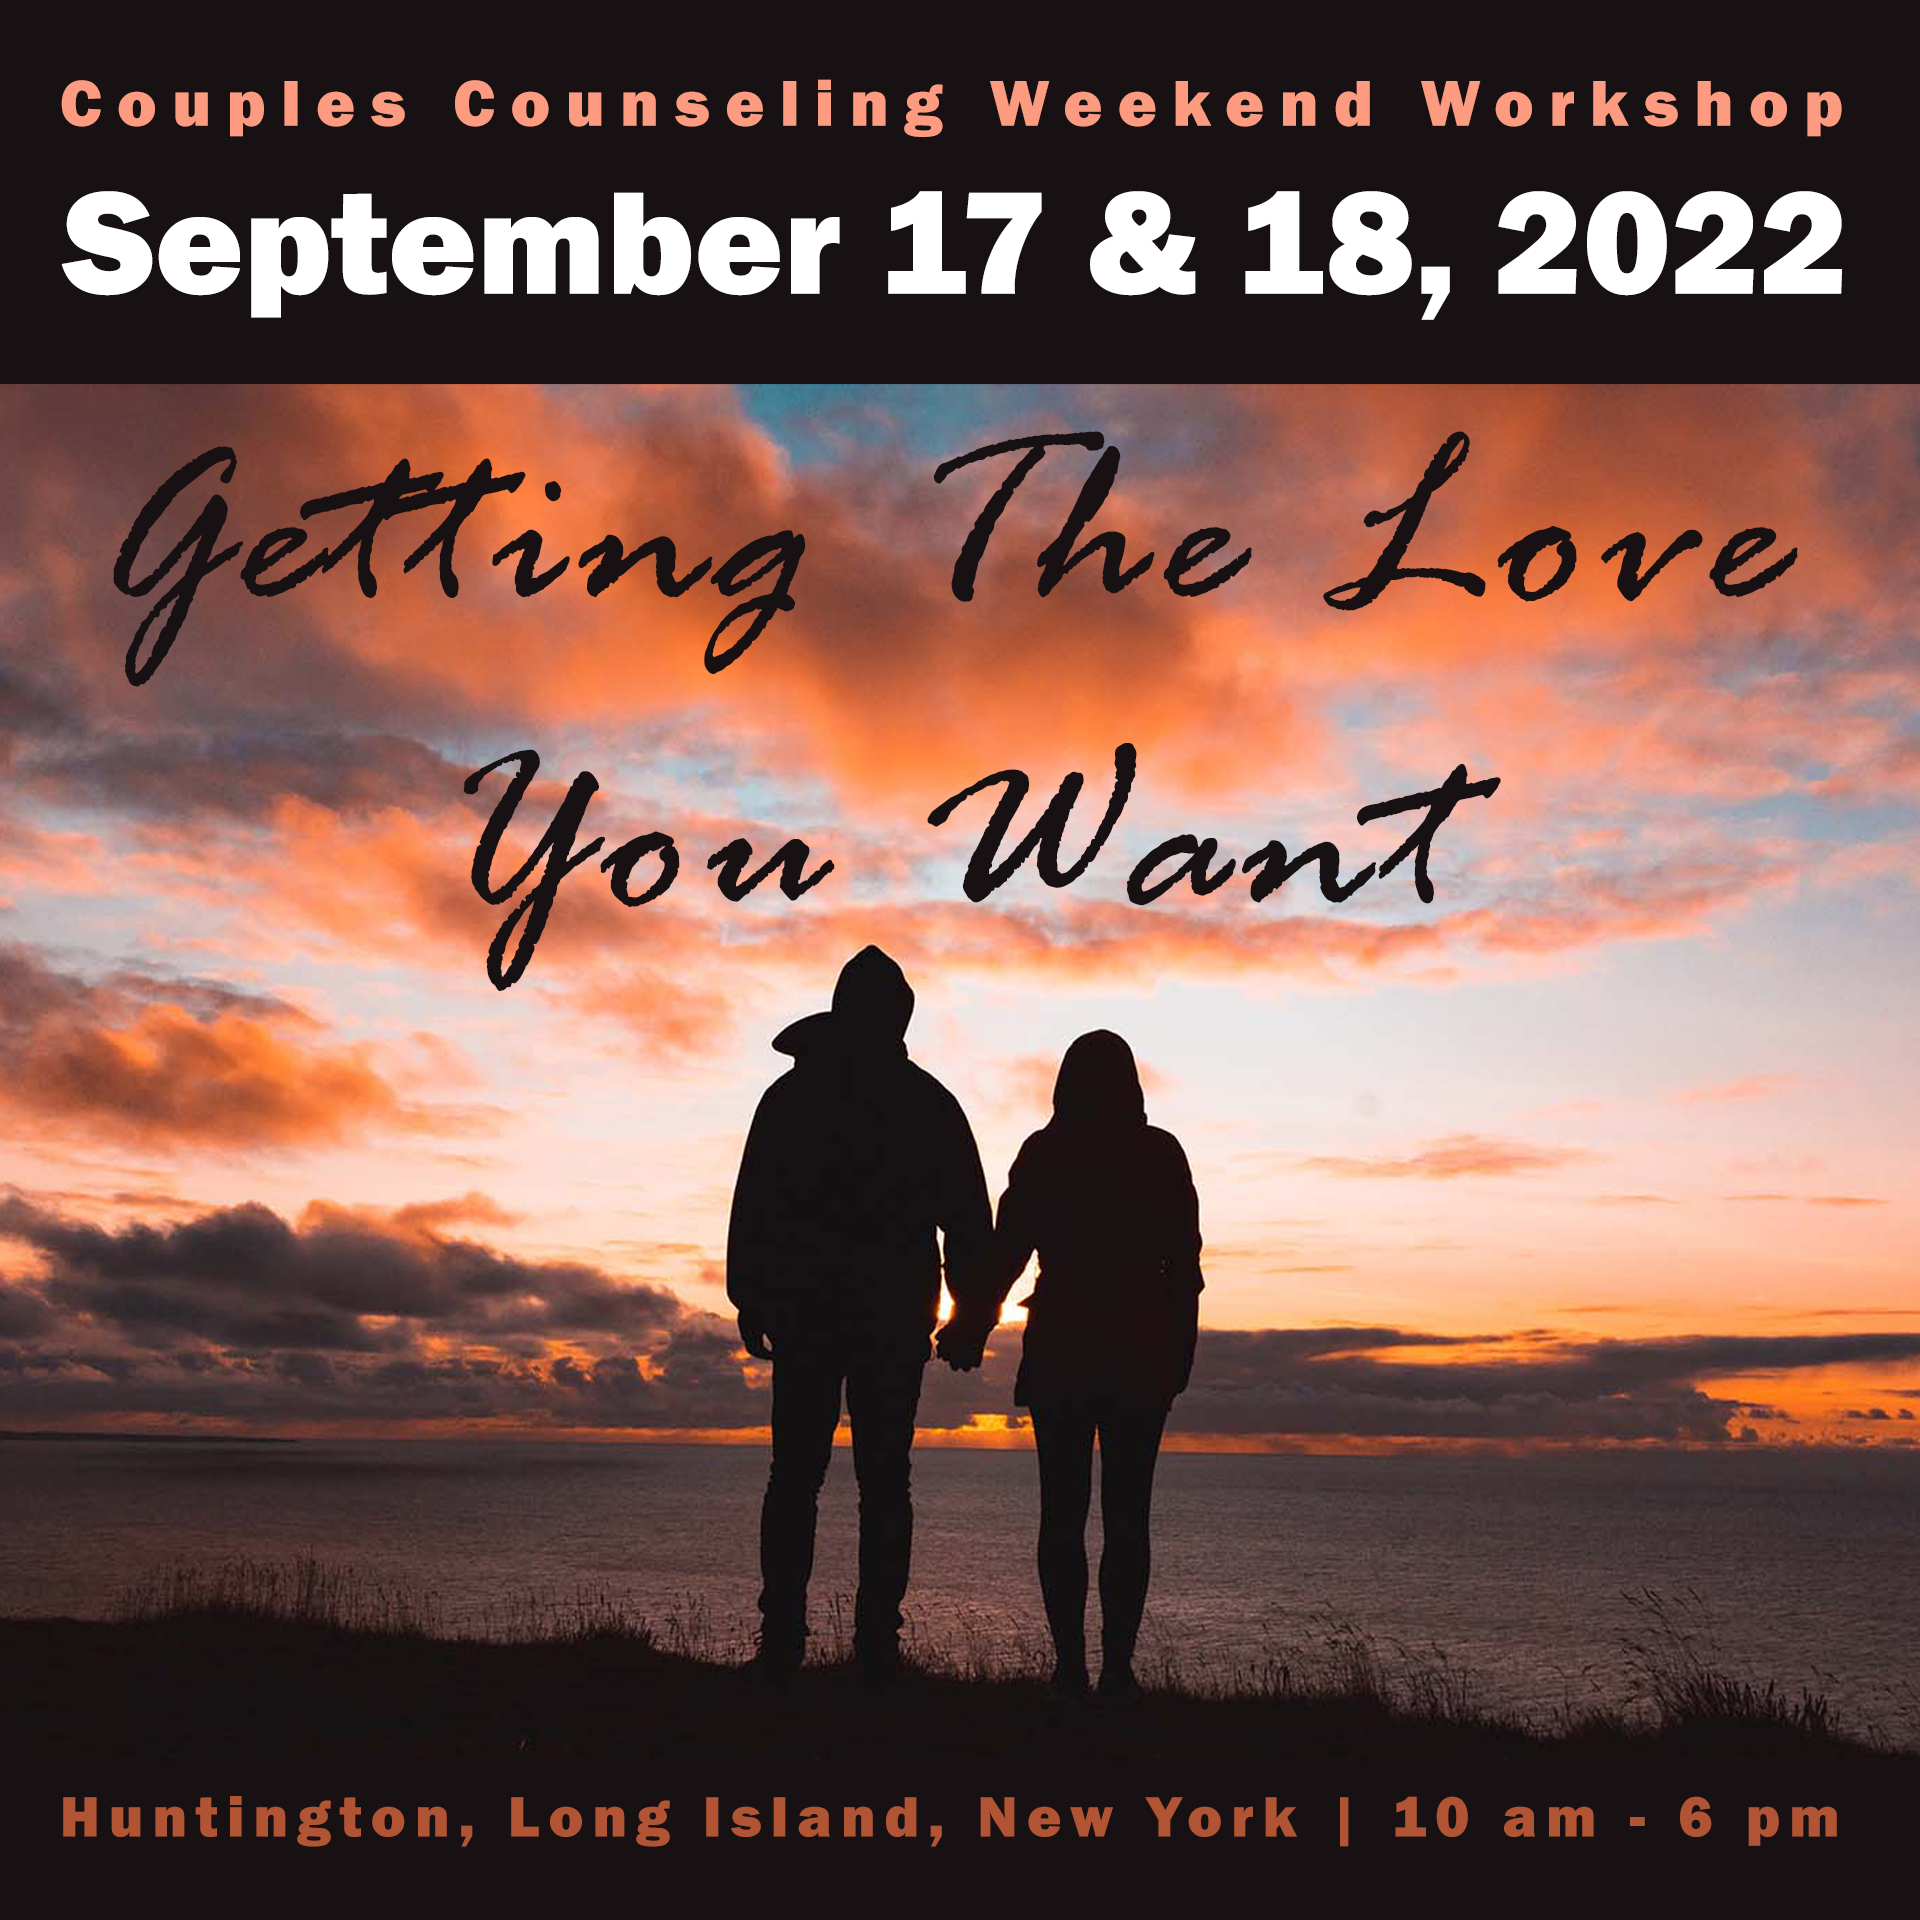 Getting The Love You Want Couples Workshop 2022